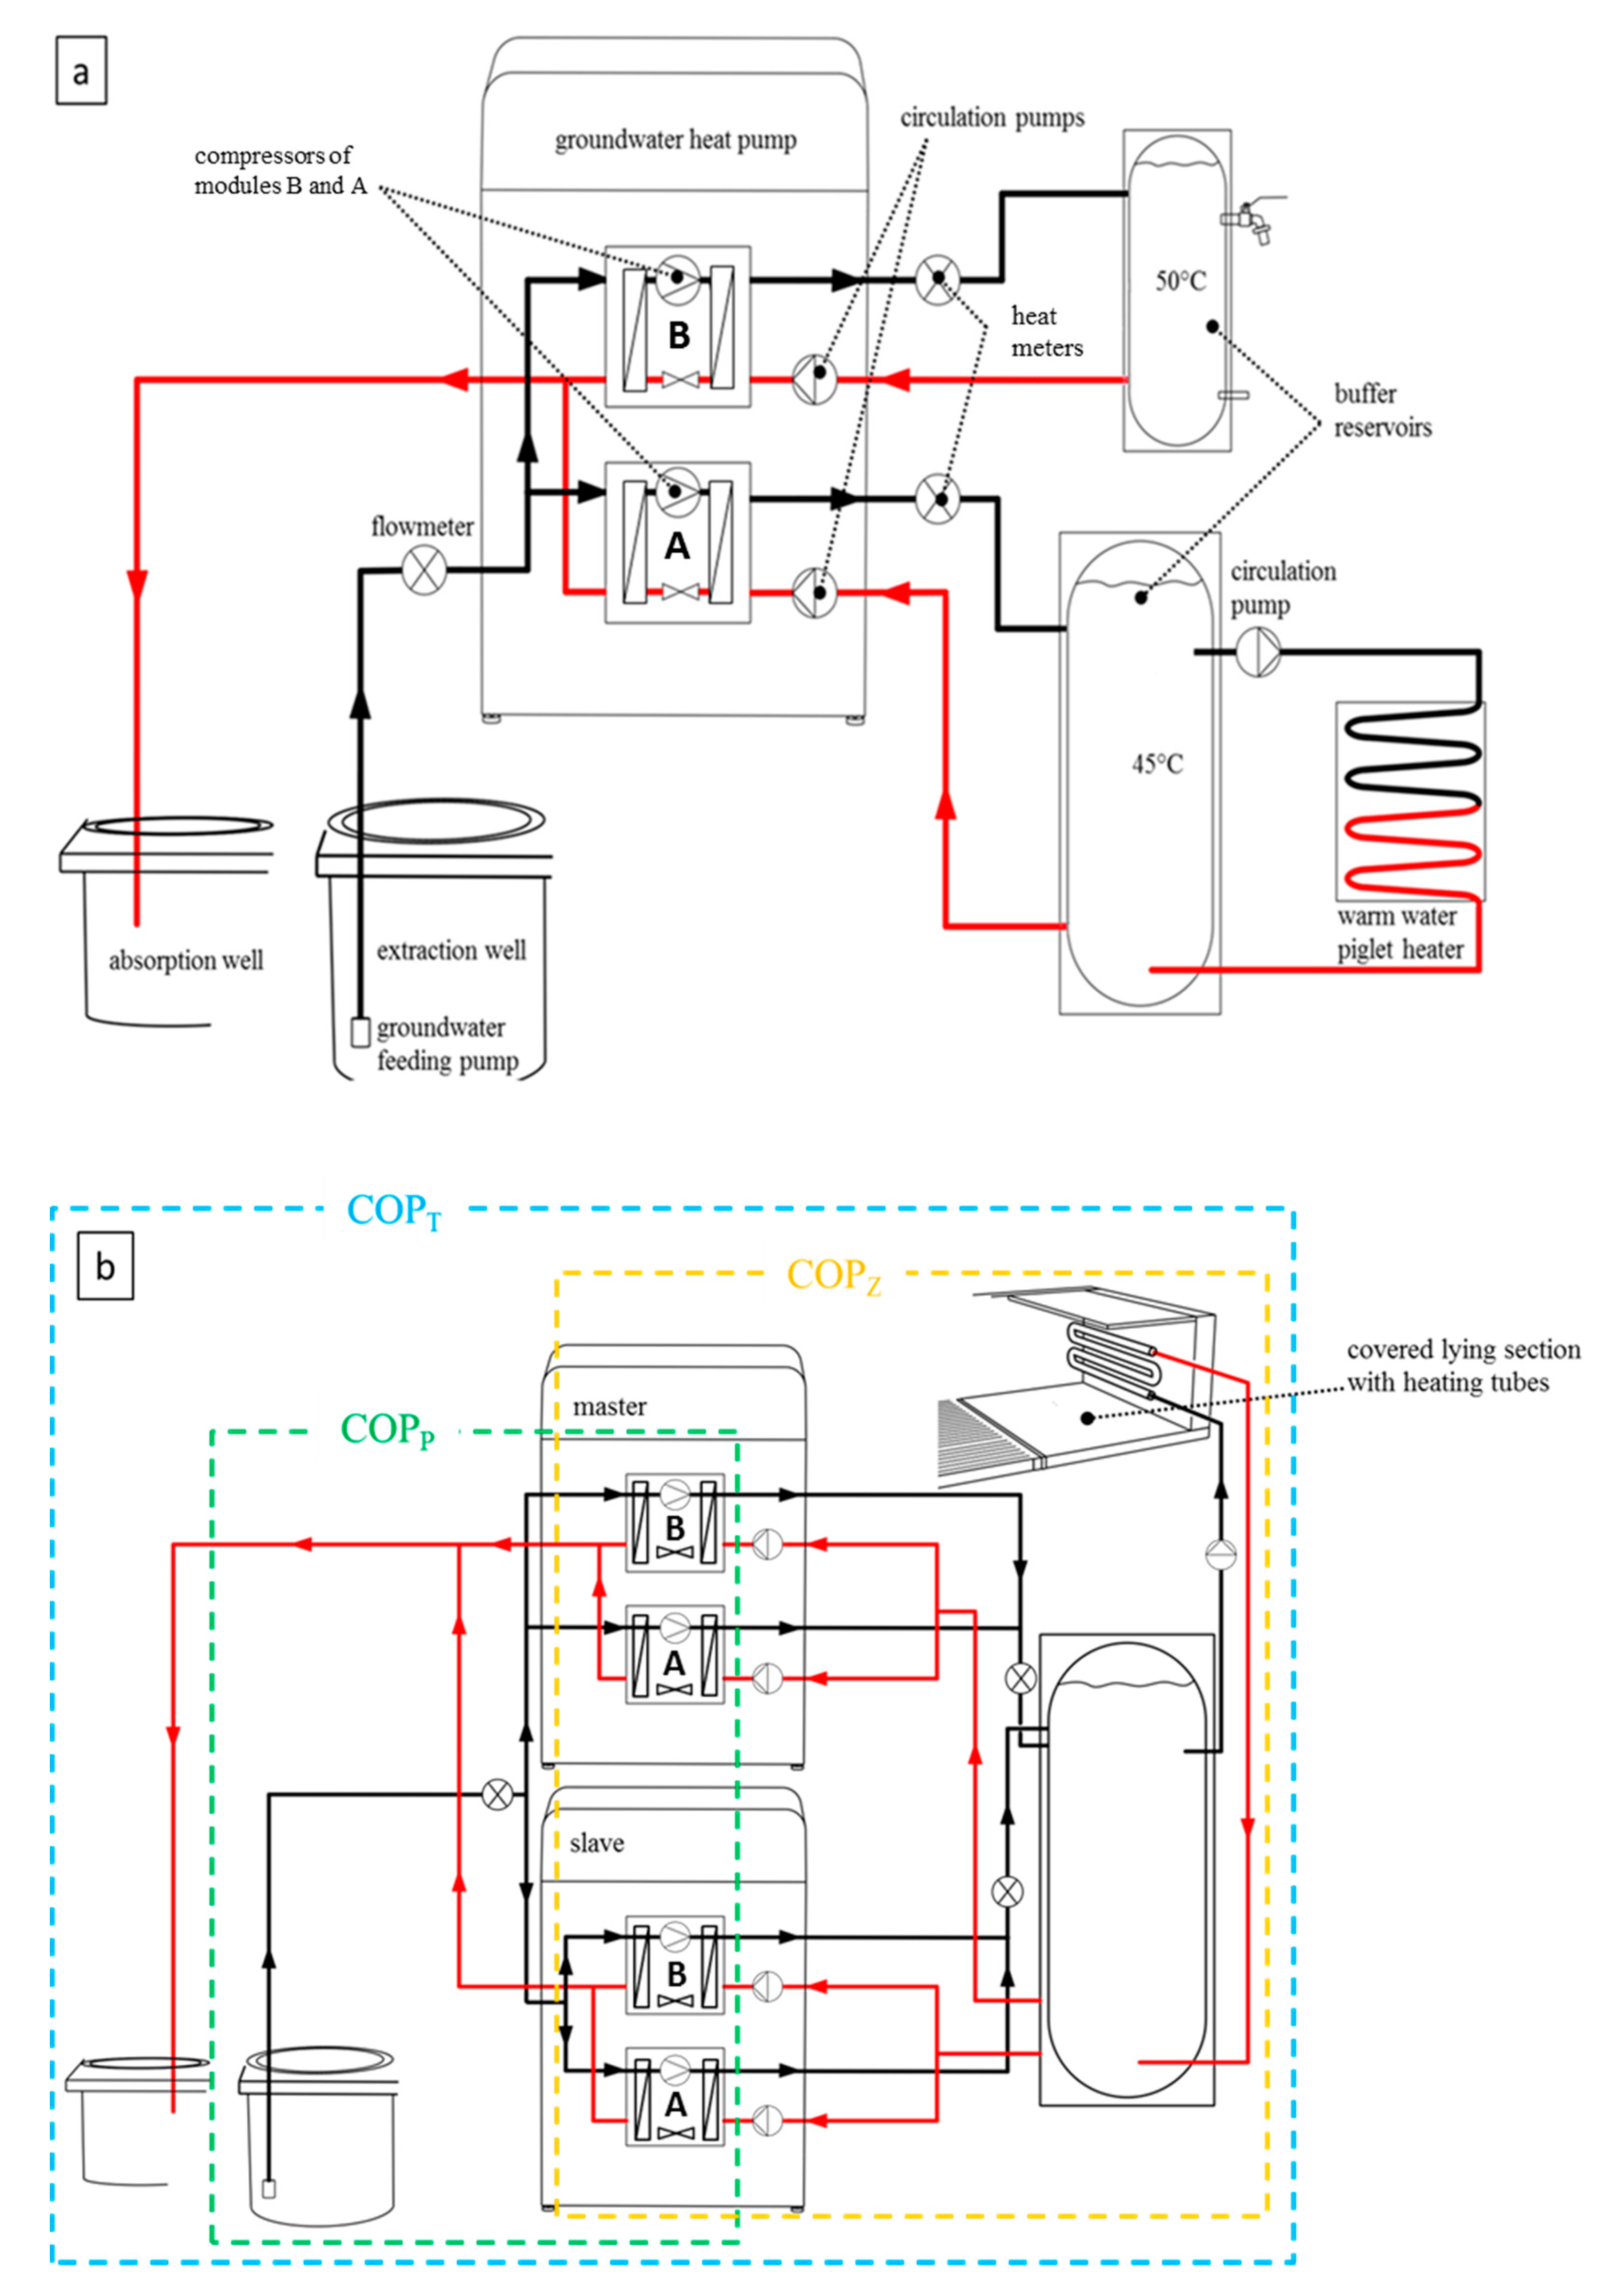 Wiring Diagram For Heat Pump For Thermo Pride Oil Furnace from www.mdpi.com